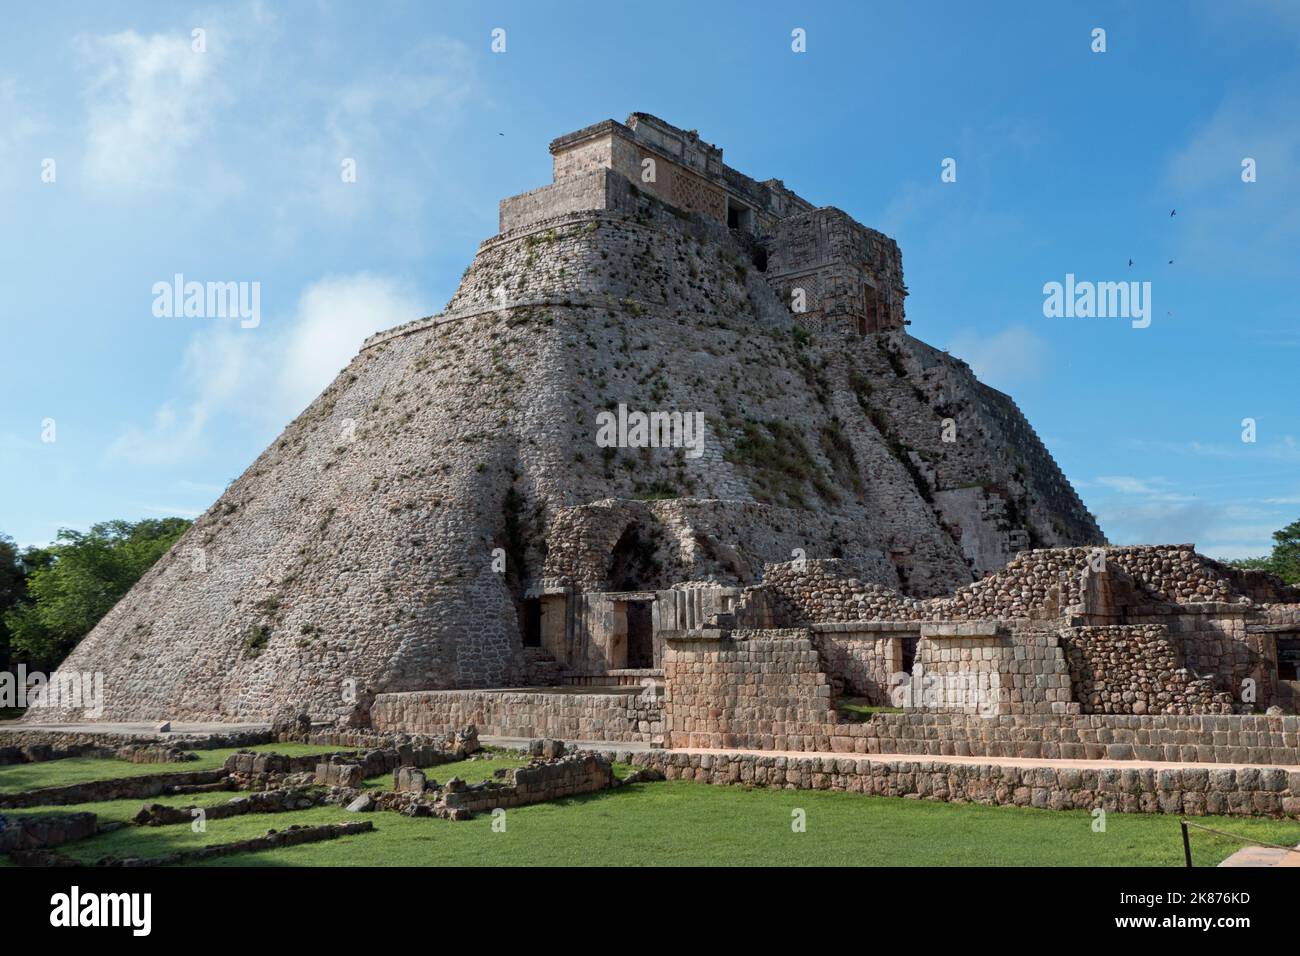 View of the Maya archeological site of Uxmal in Yucatan, Mexico. Mayan ruins with Pyramid Of The Magician and ancient building for tourism and travel Stock Photo